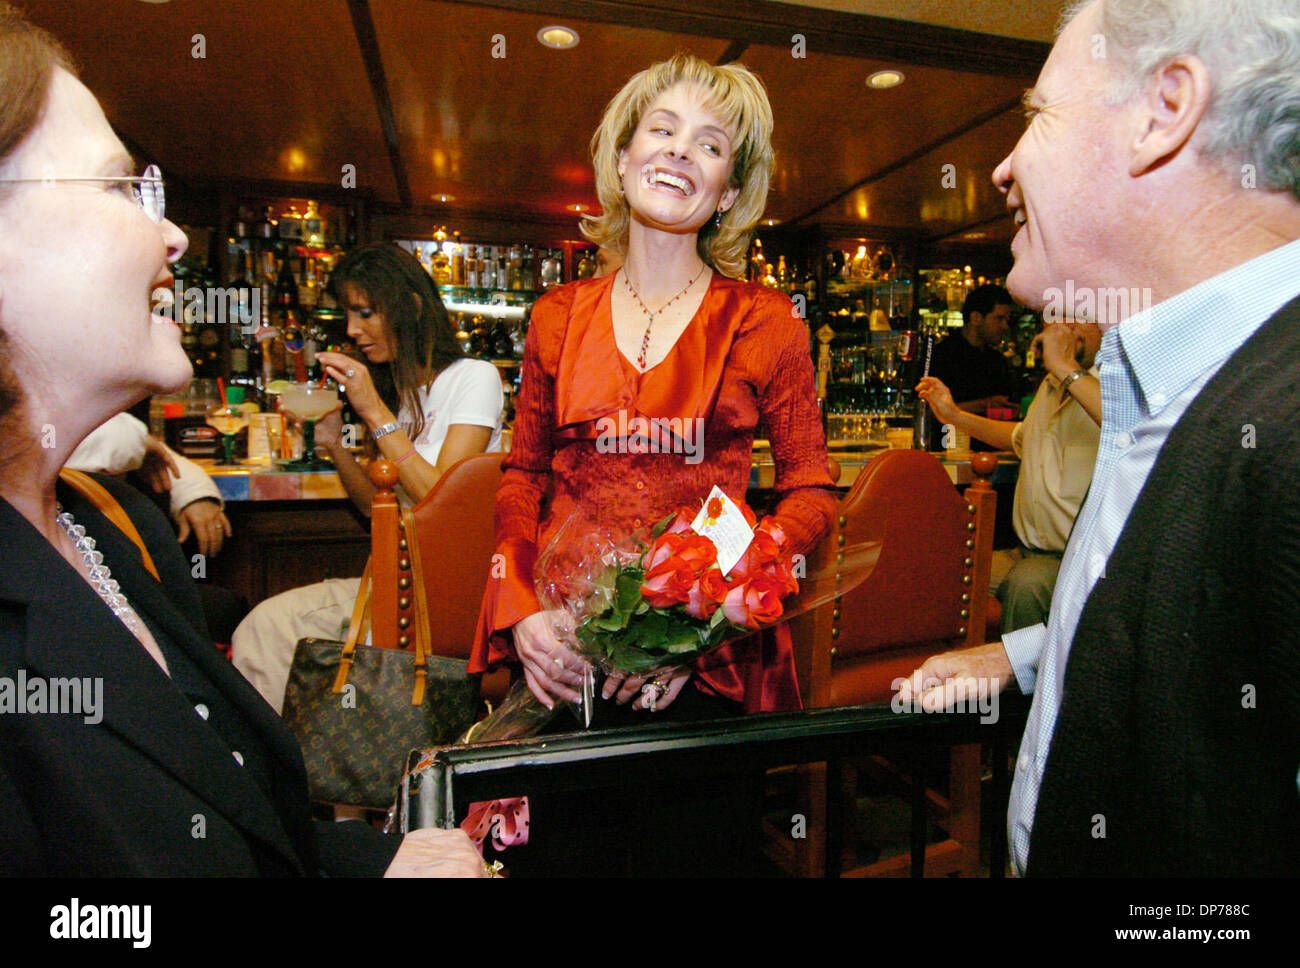 Nov 07, 2006; Pleasanton, CA, USA; Jill Buck ( center), Republican candidate for the 18th Assembly District, holds an election night party at Alberto's Cantina in Pleasanton Tuesday, November 7, 2006. Here, speaks with guests Gail and John Gilpin ( Pleasanton). Mandatory Credit: Photo by Gina Halferty/Tri-Valley Herald/ZUMA Press. (©) Copyright 2006 by Tri-Valley Herald Stock Photo